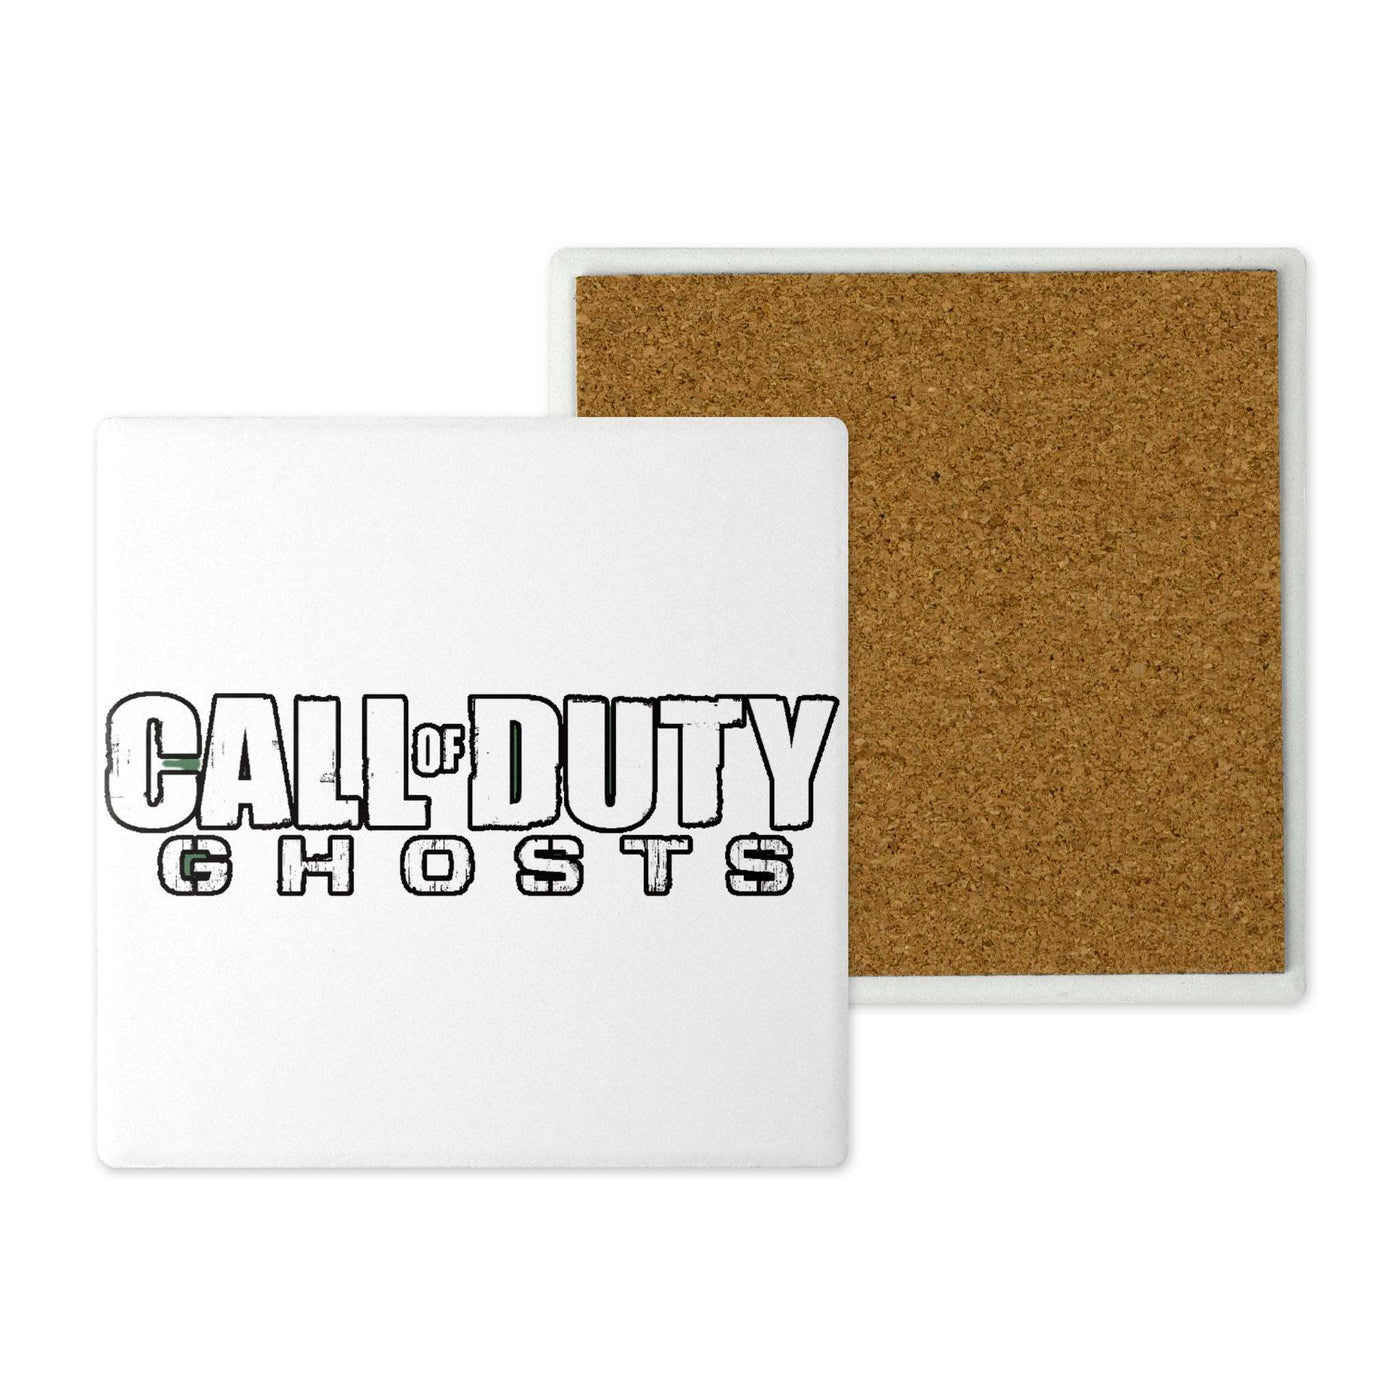 Call_of_Duty_Ghosts - Stone Coasters Set Gapo Goods